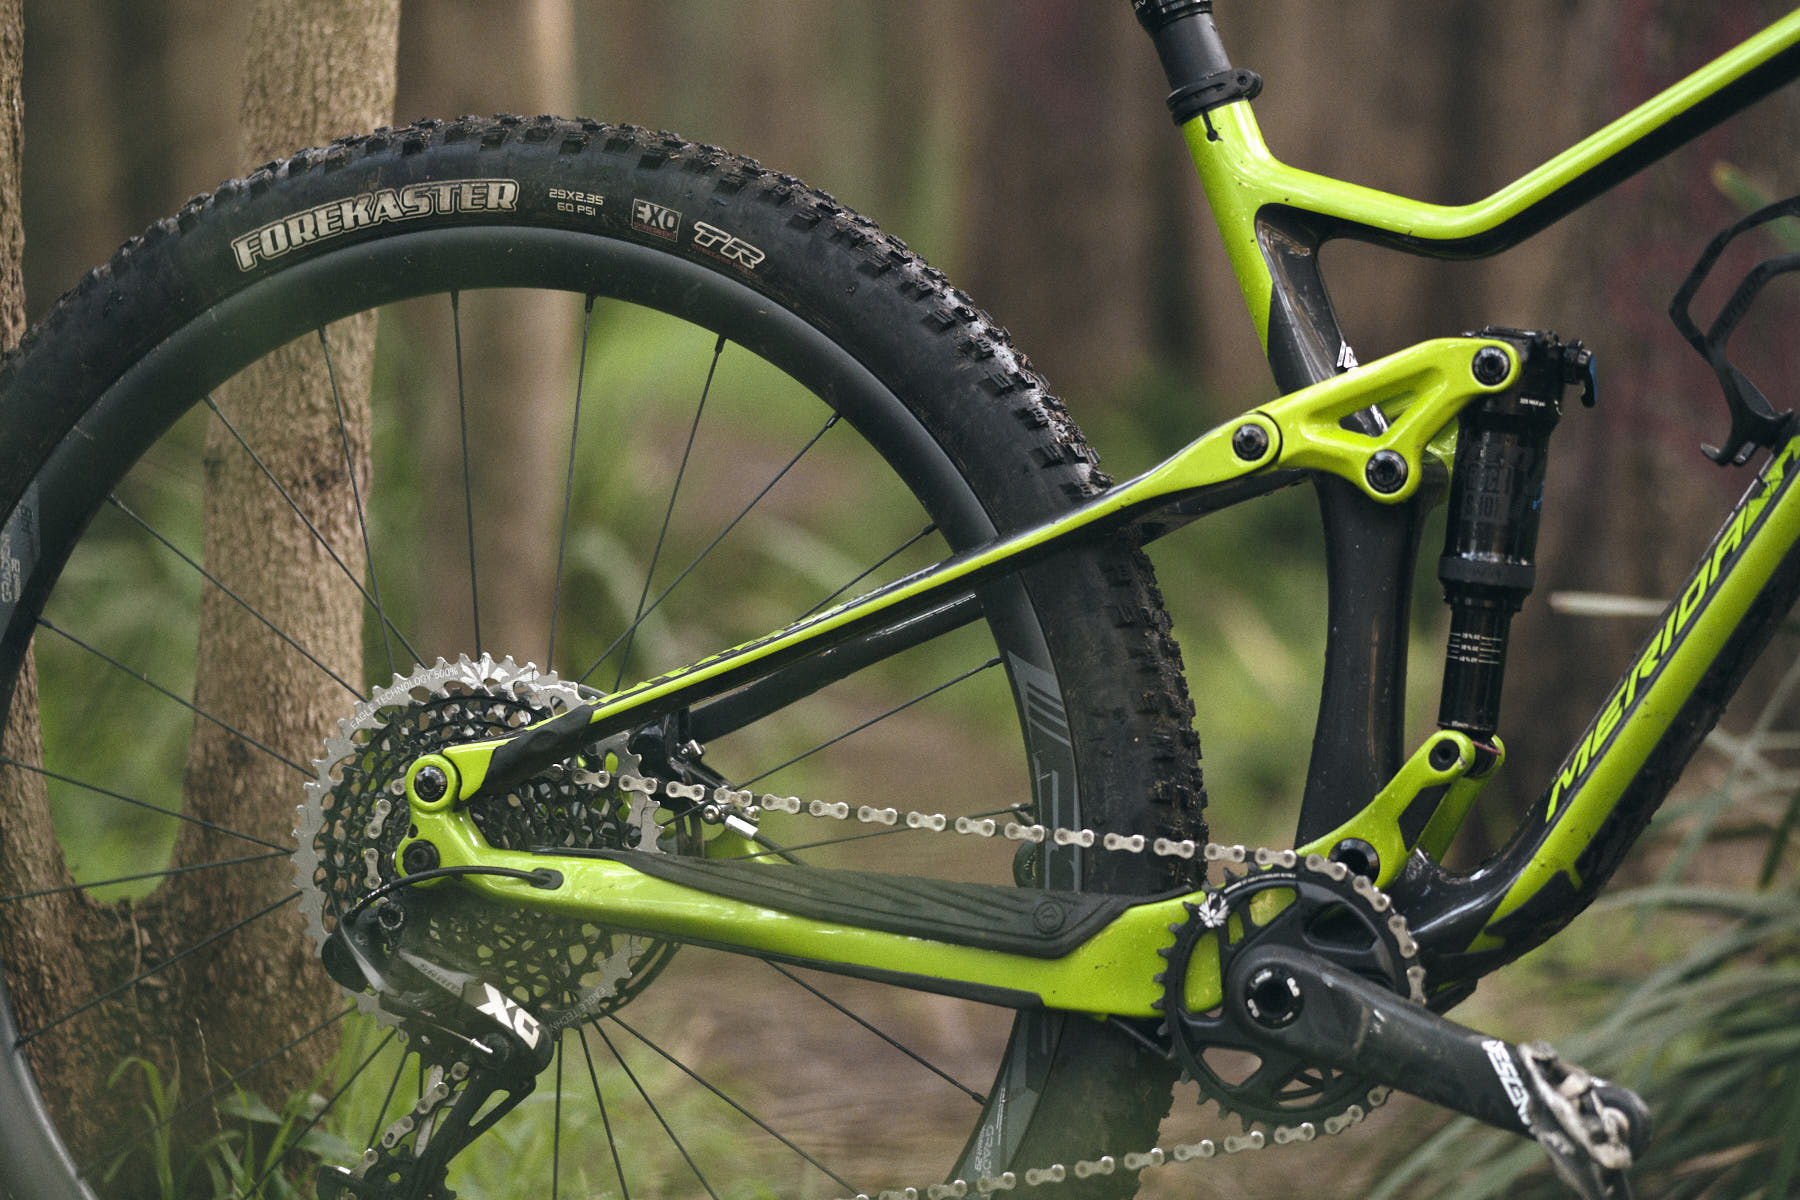 annoncere feudale vil gøre Flow's Top 10 | Wil Gives Us His Best Mountain Bikes & Gear From 2019